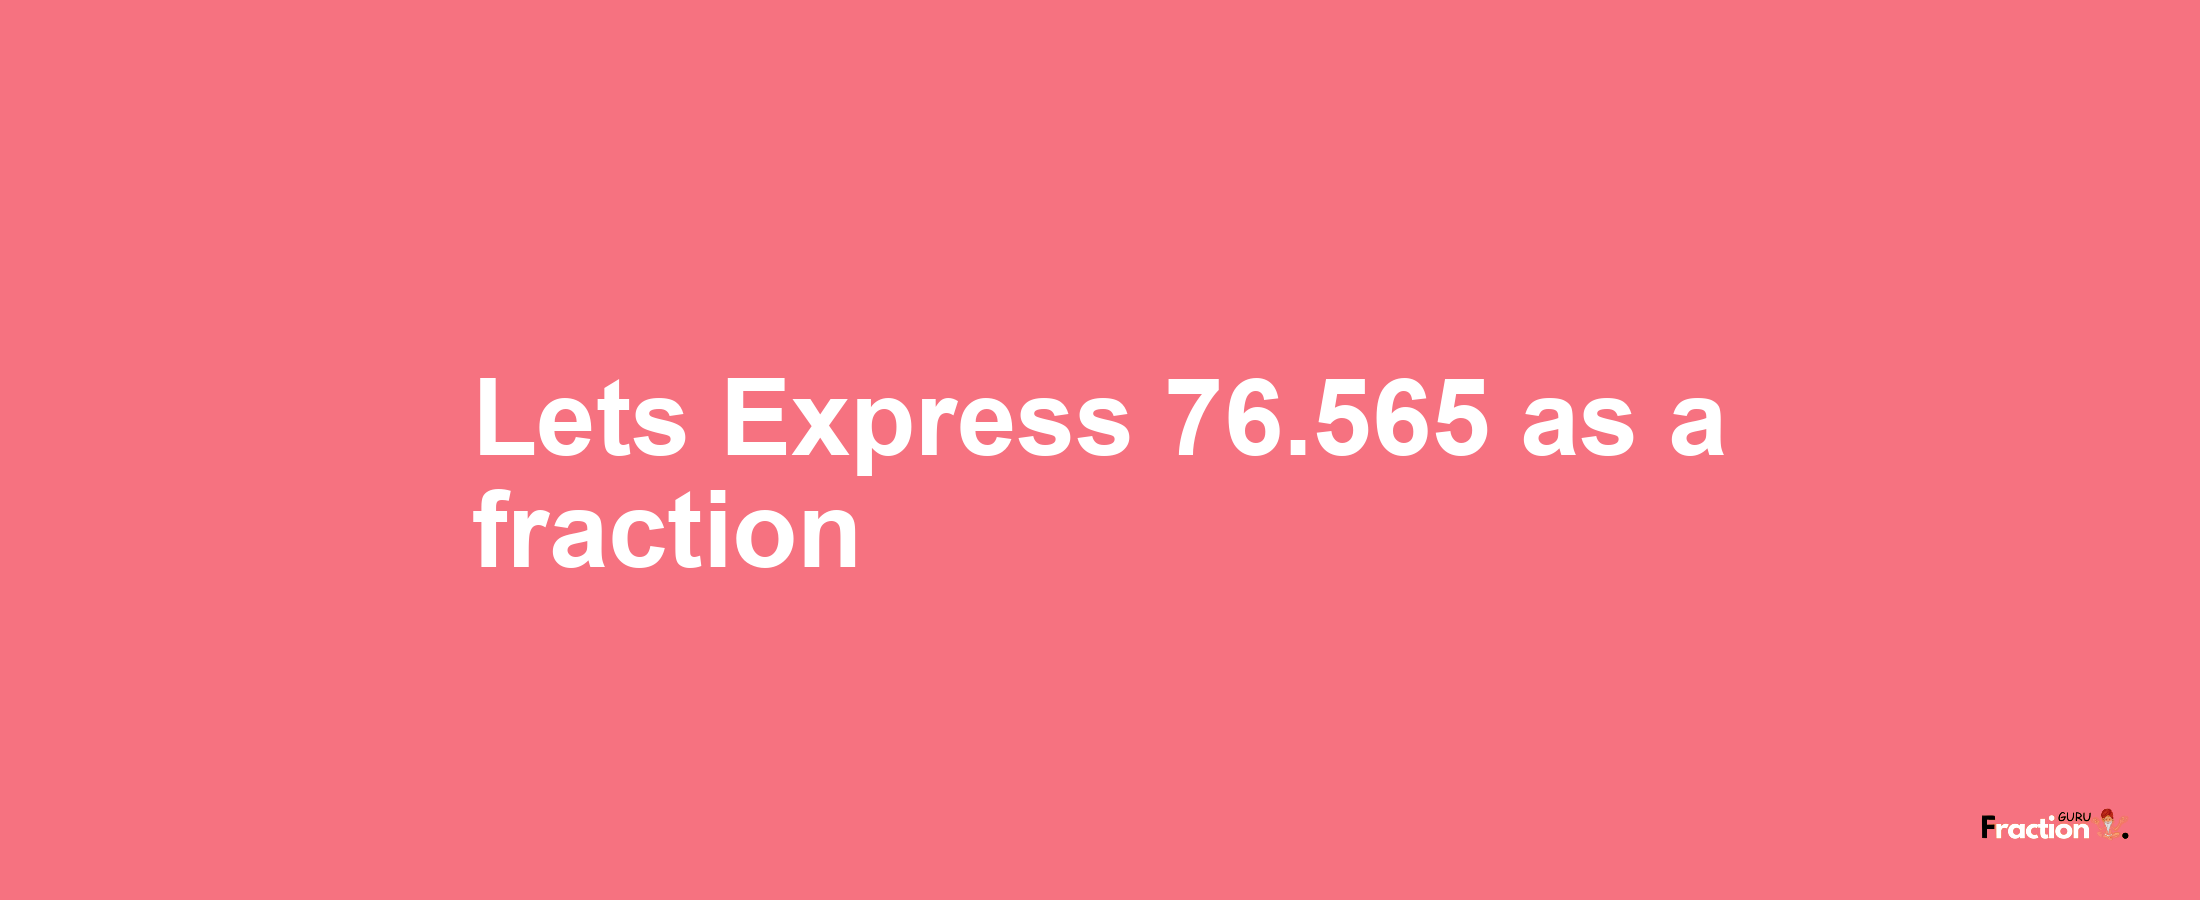 Lets Express 76.565 as afraction